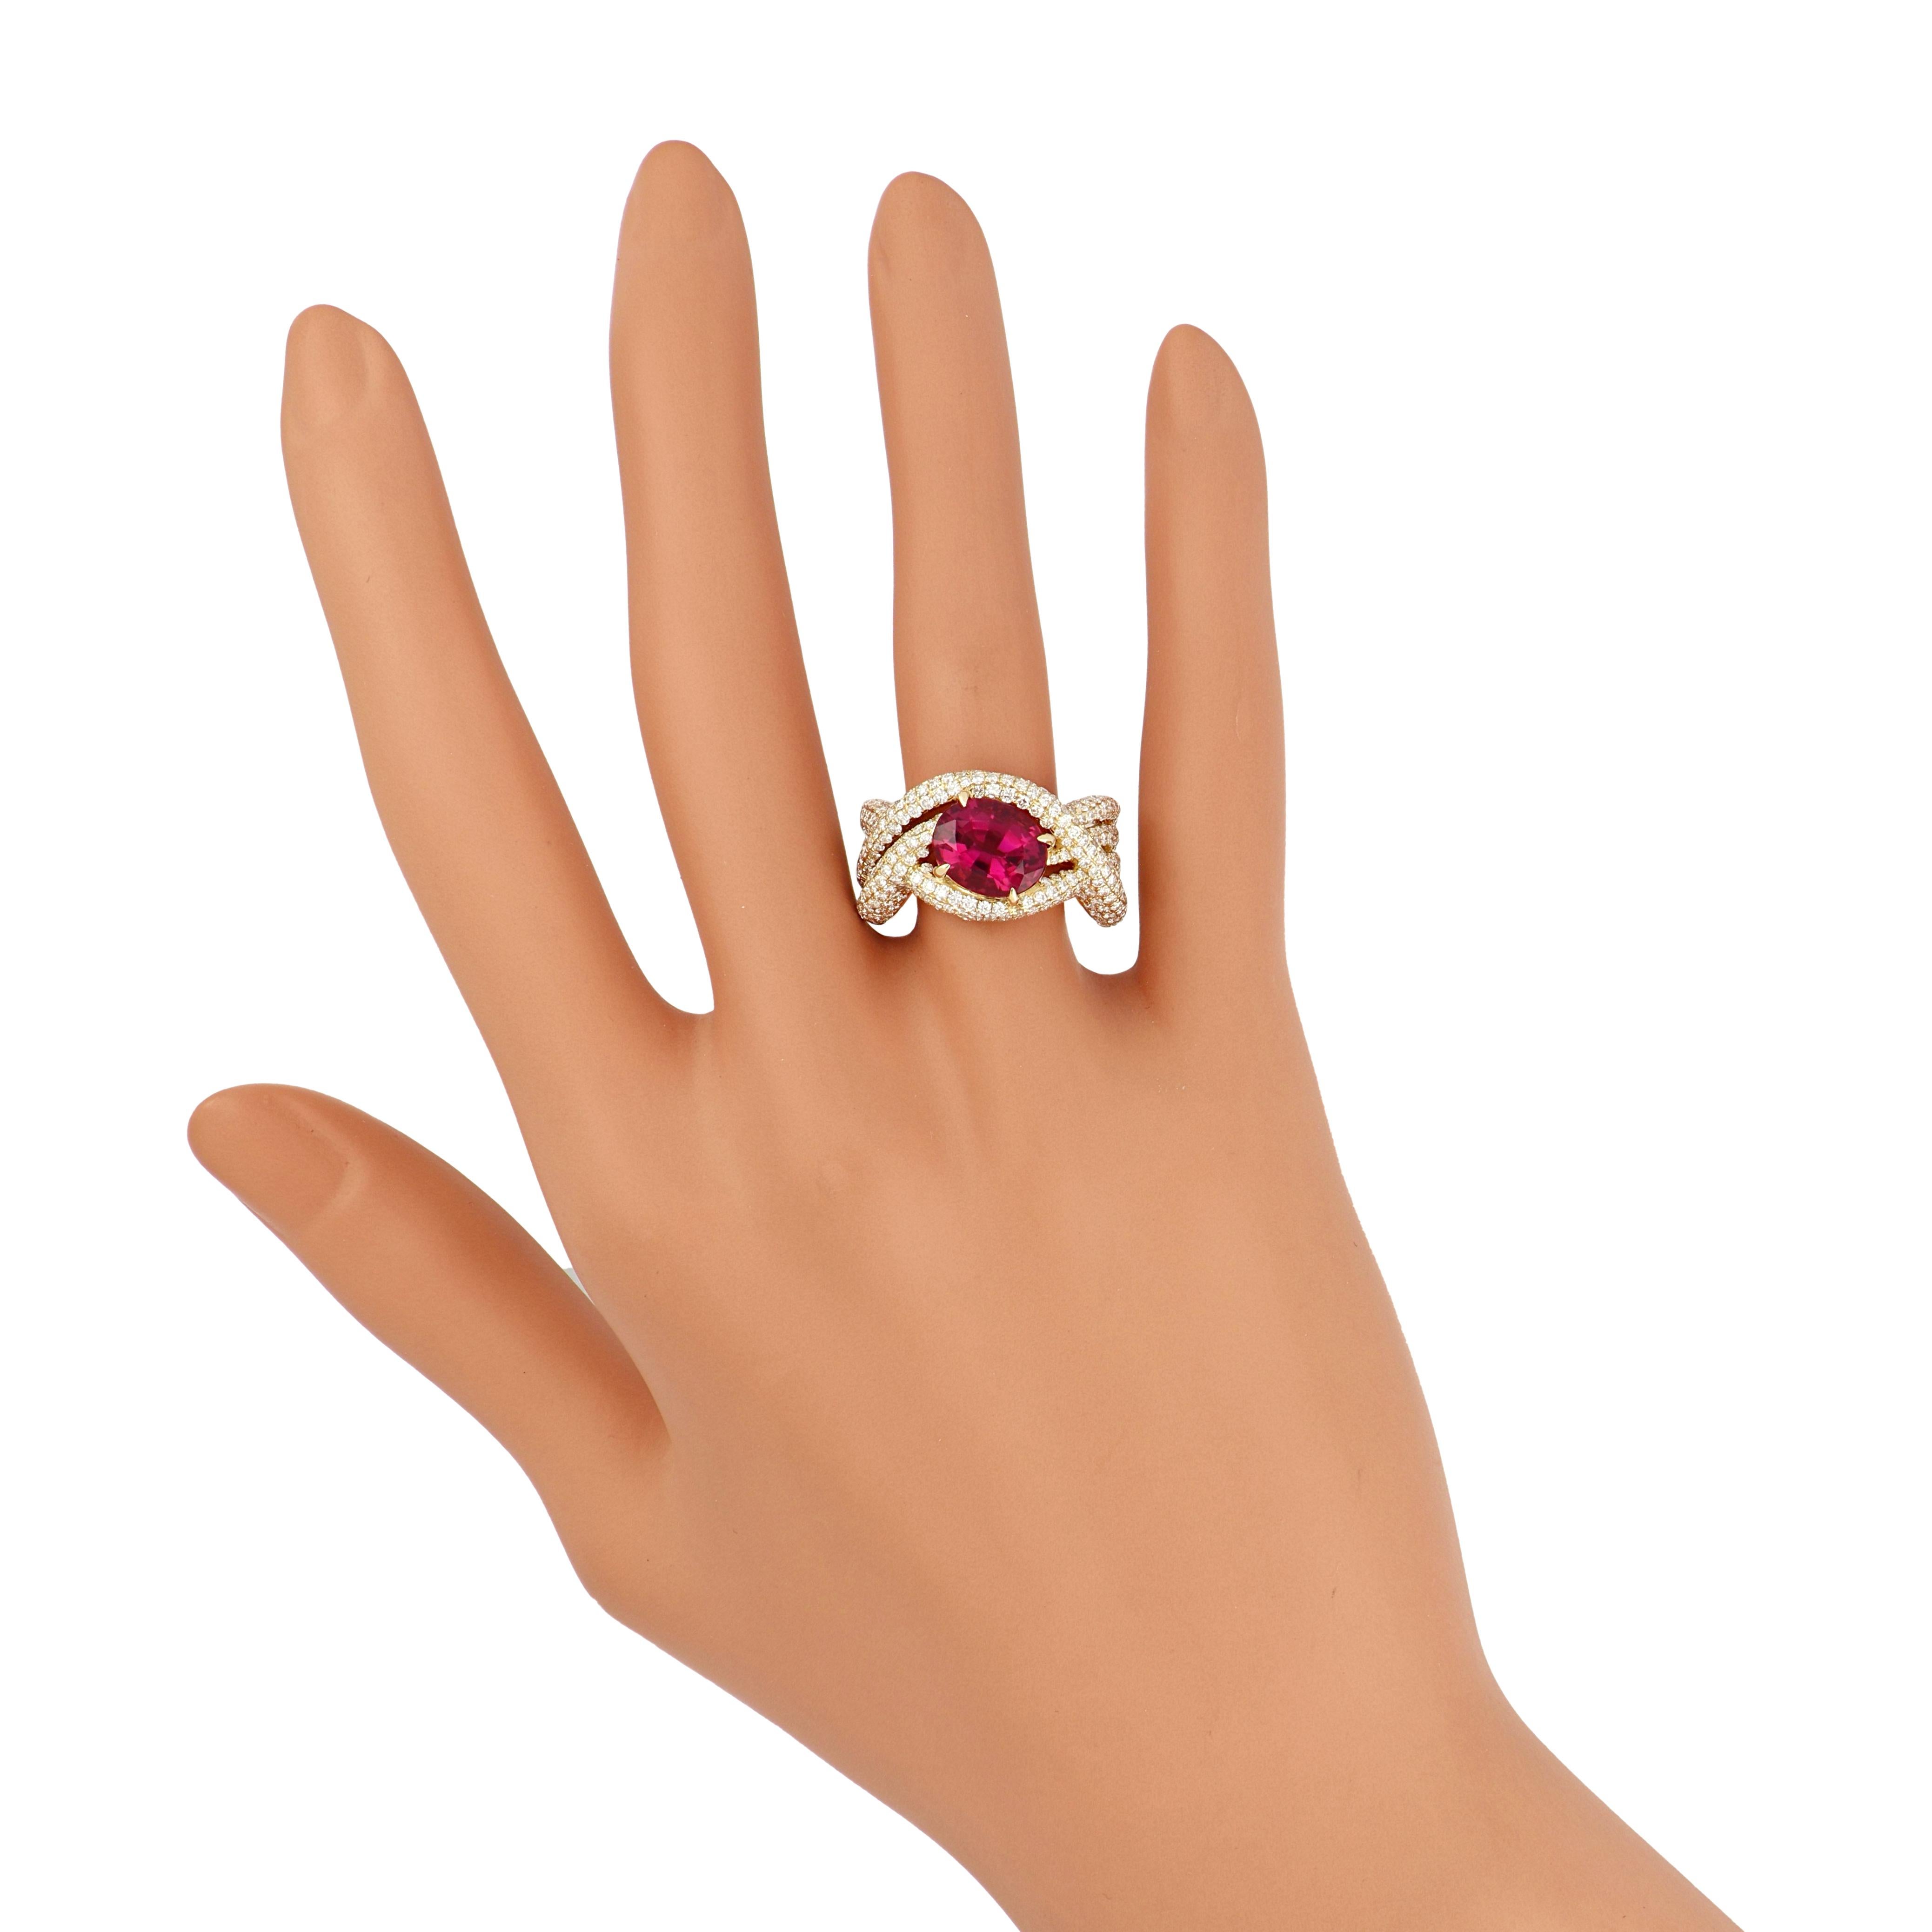 Delve into the epitome of opulence with our exquisitely crafted 18 karat Yellow Gold Ring. Adorned with a resplendent 2.8 carat (approx.) Oval Shape Rubellite as its centrepiece, this masterpiece is embraced by a mesmerising ensemble of diamonds,